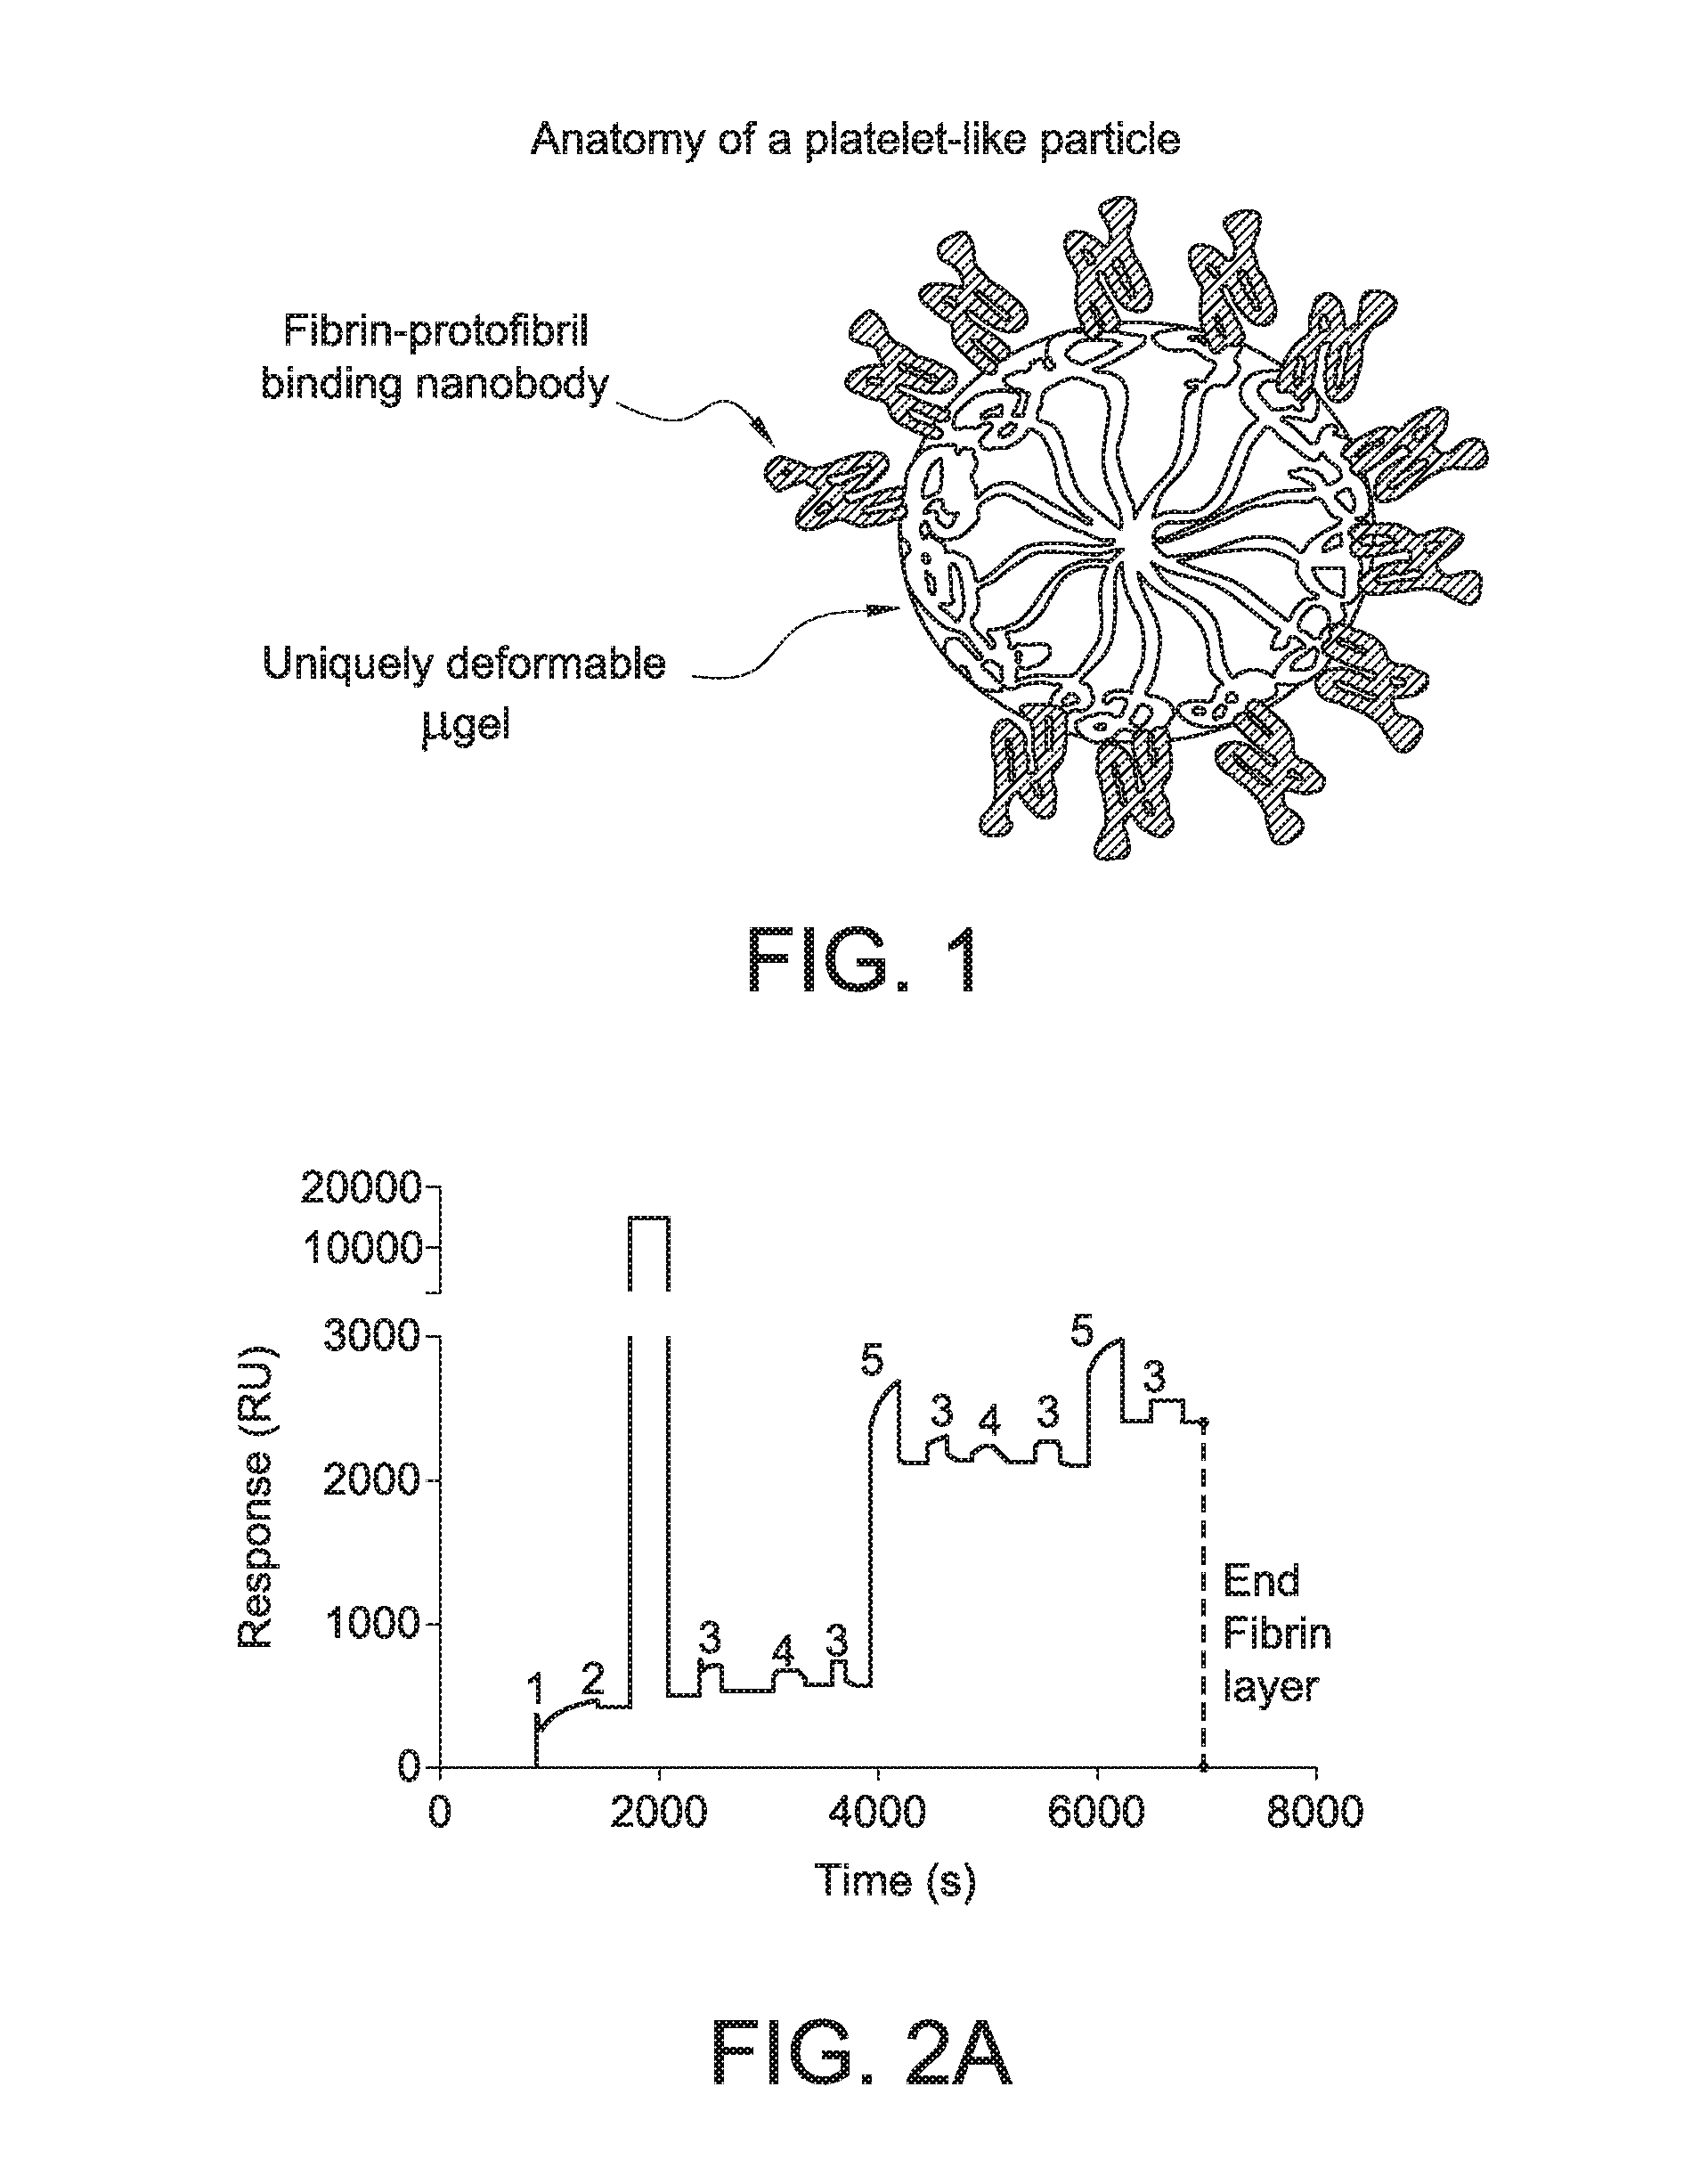 Functionalized microgels with fibrin binding elements